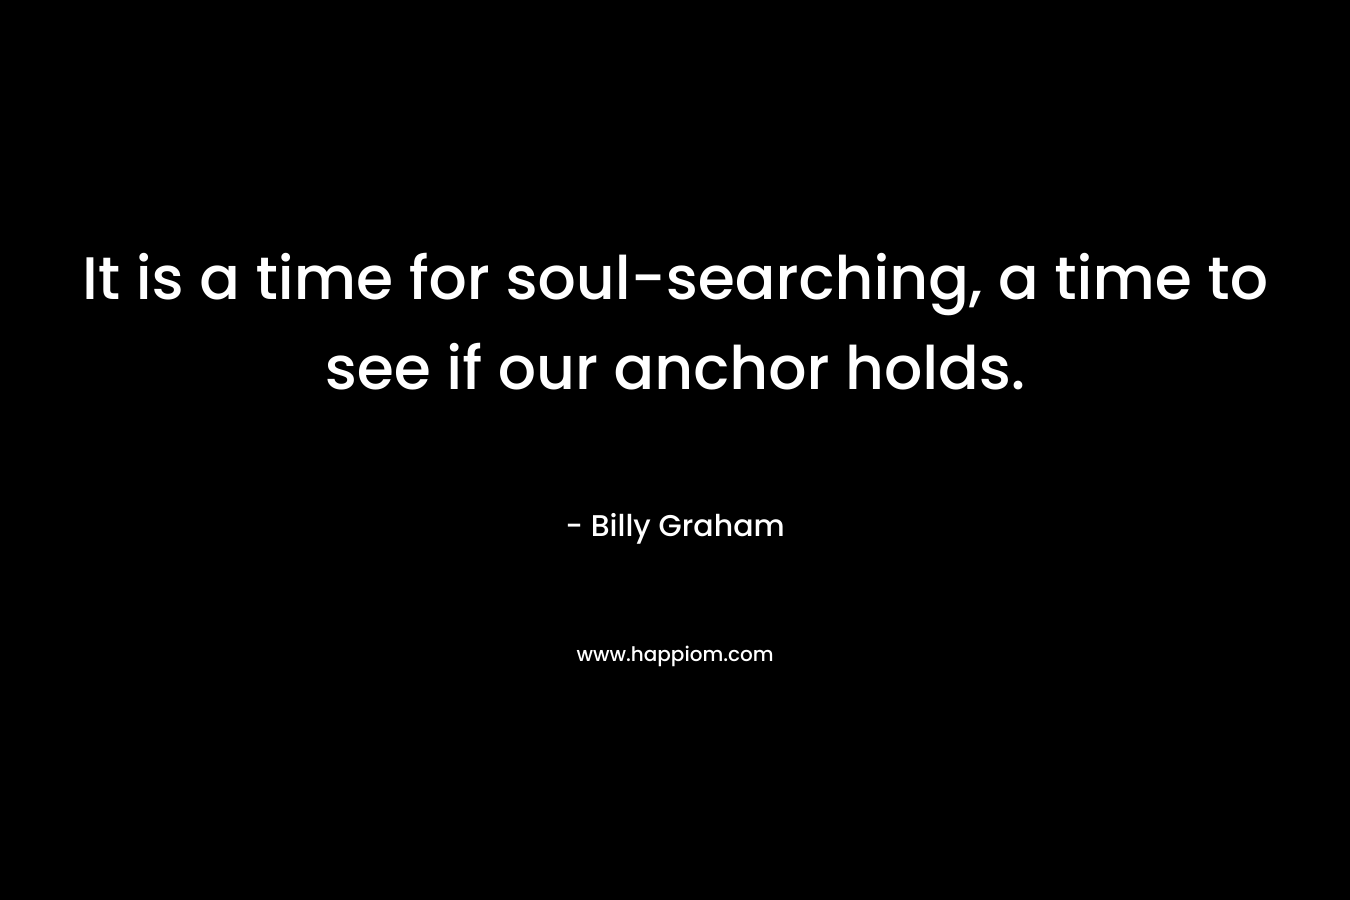 It is a time for soul-searching, a time to see if our anchor holds.